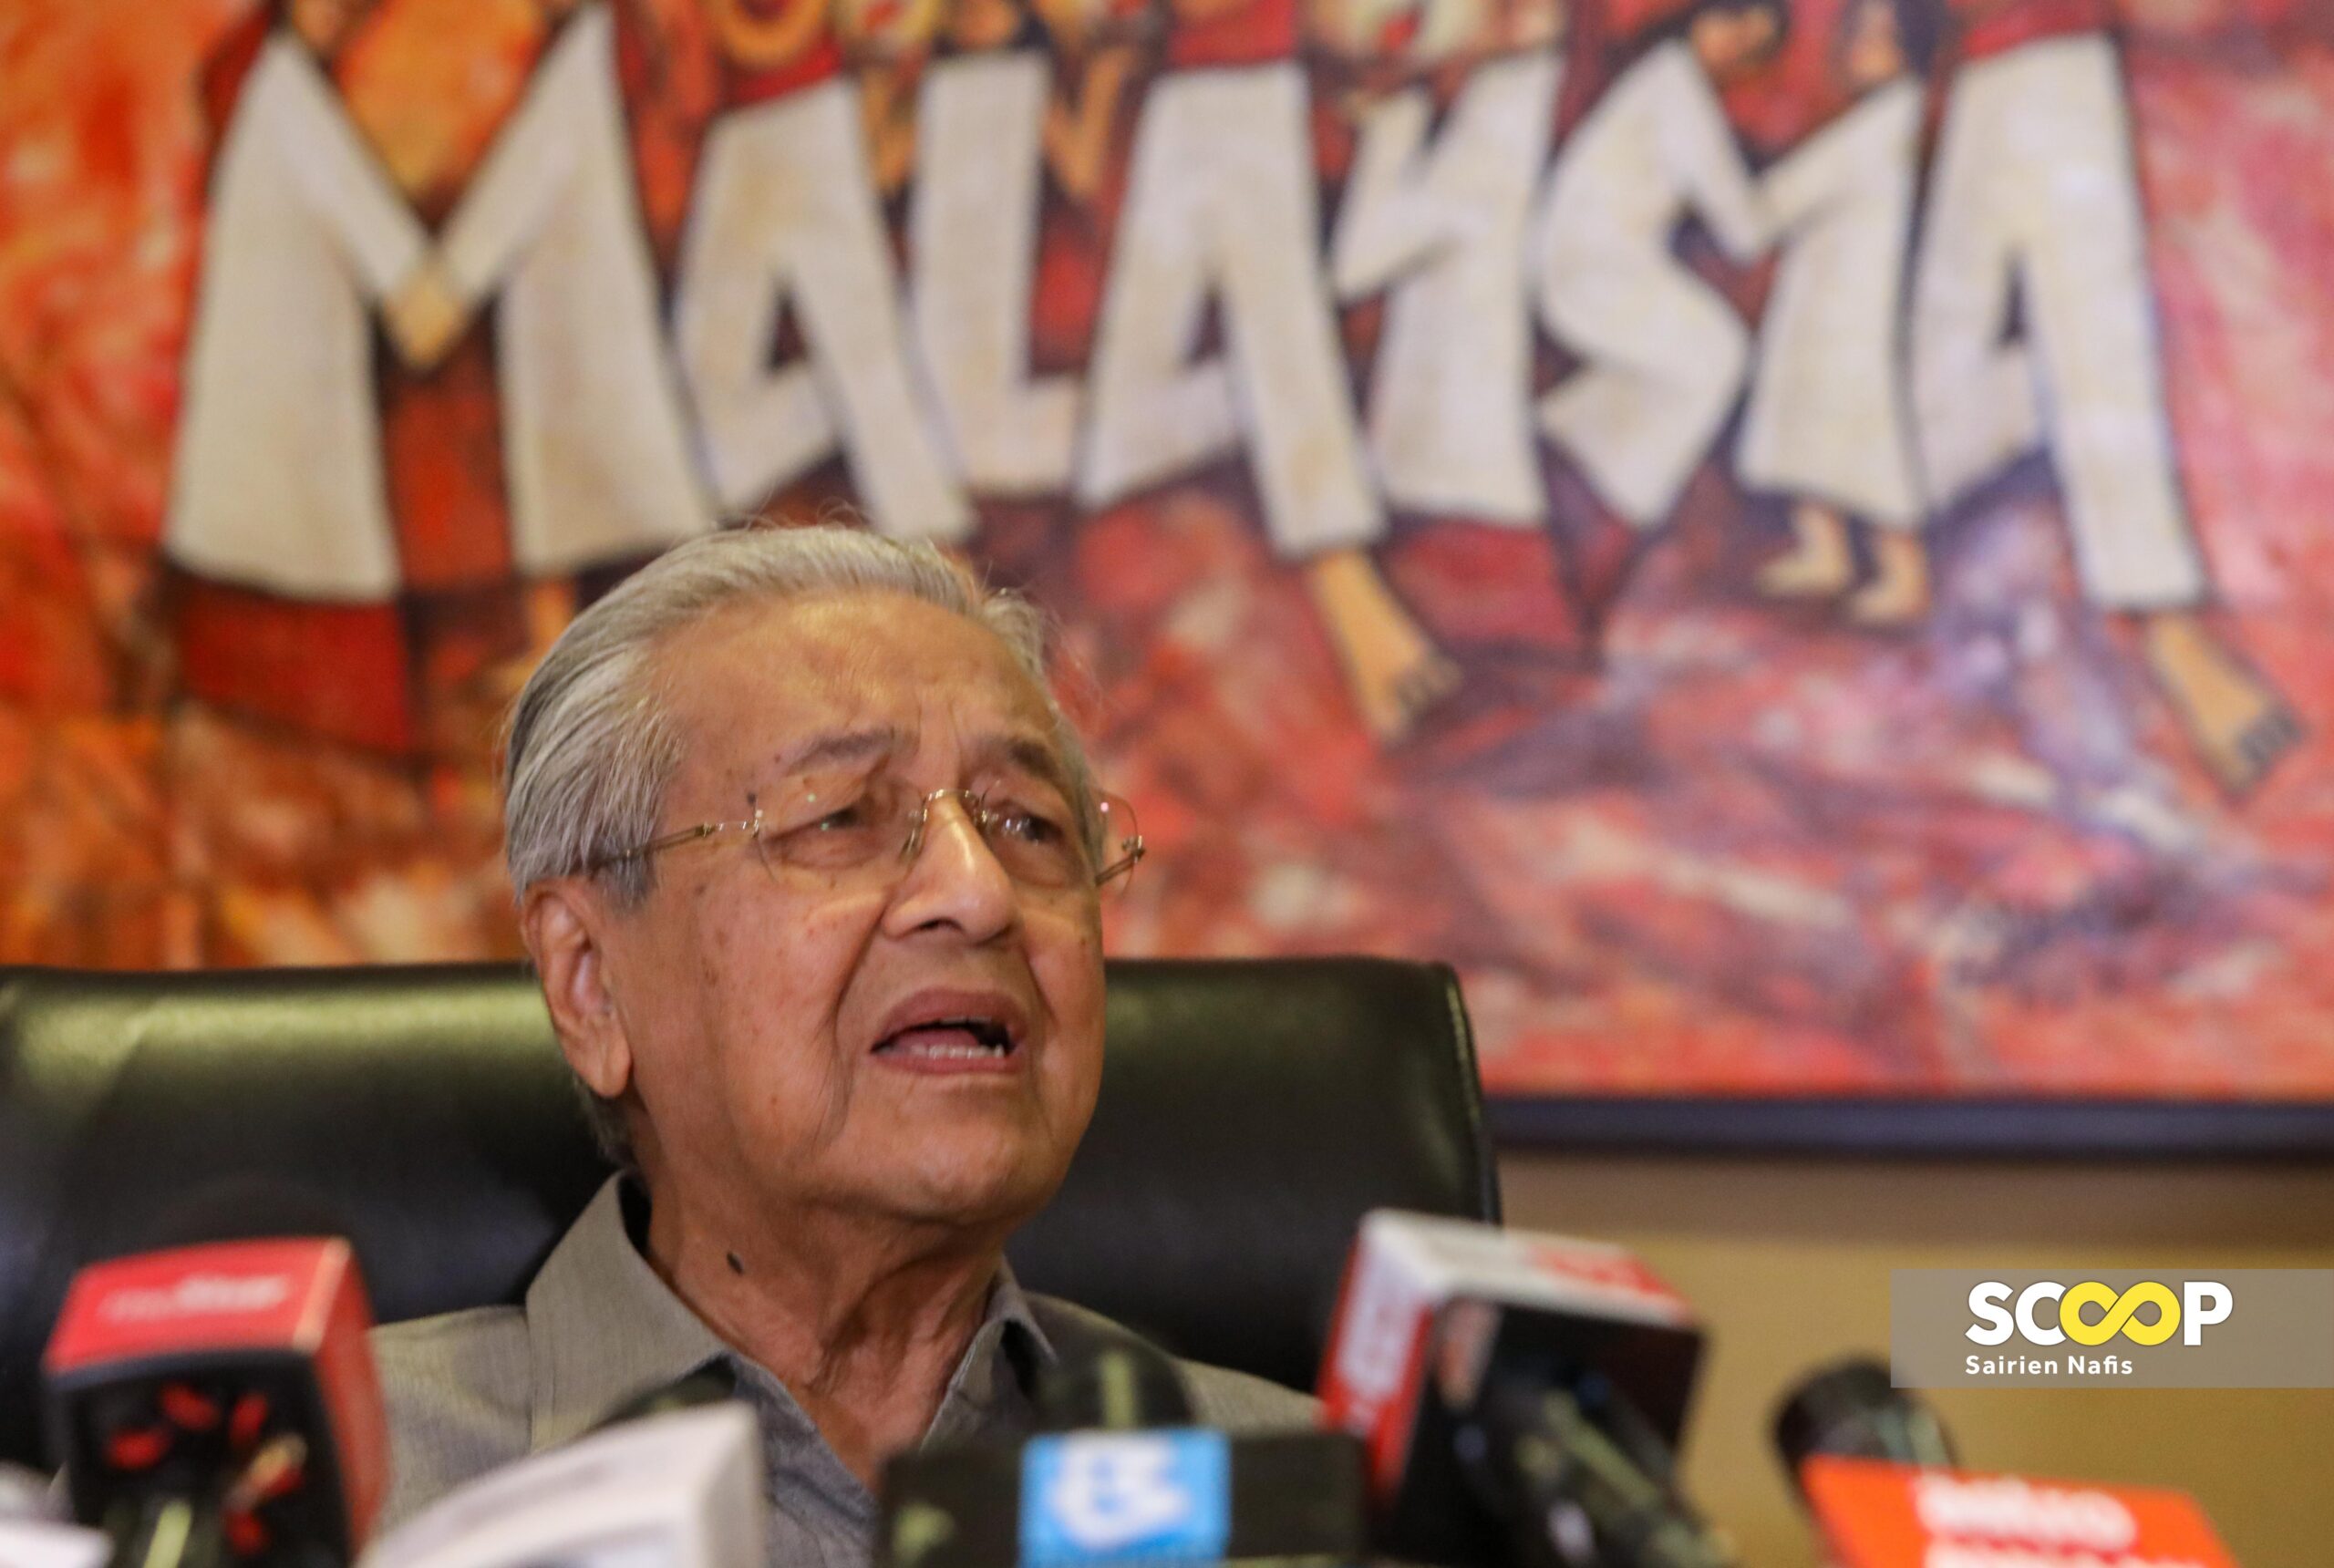 Dr Mahathir wants weapons firms out of Malaysia, despite past deals during his tenure